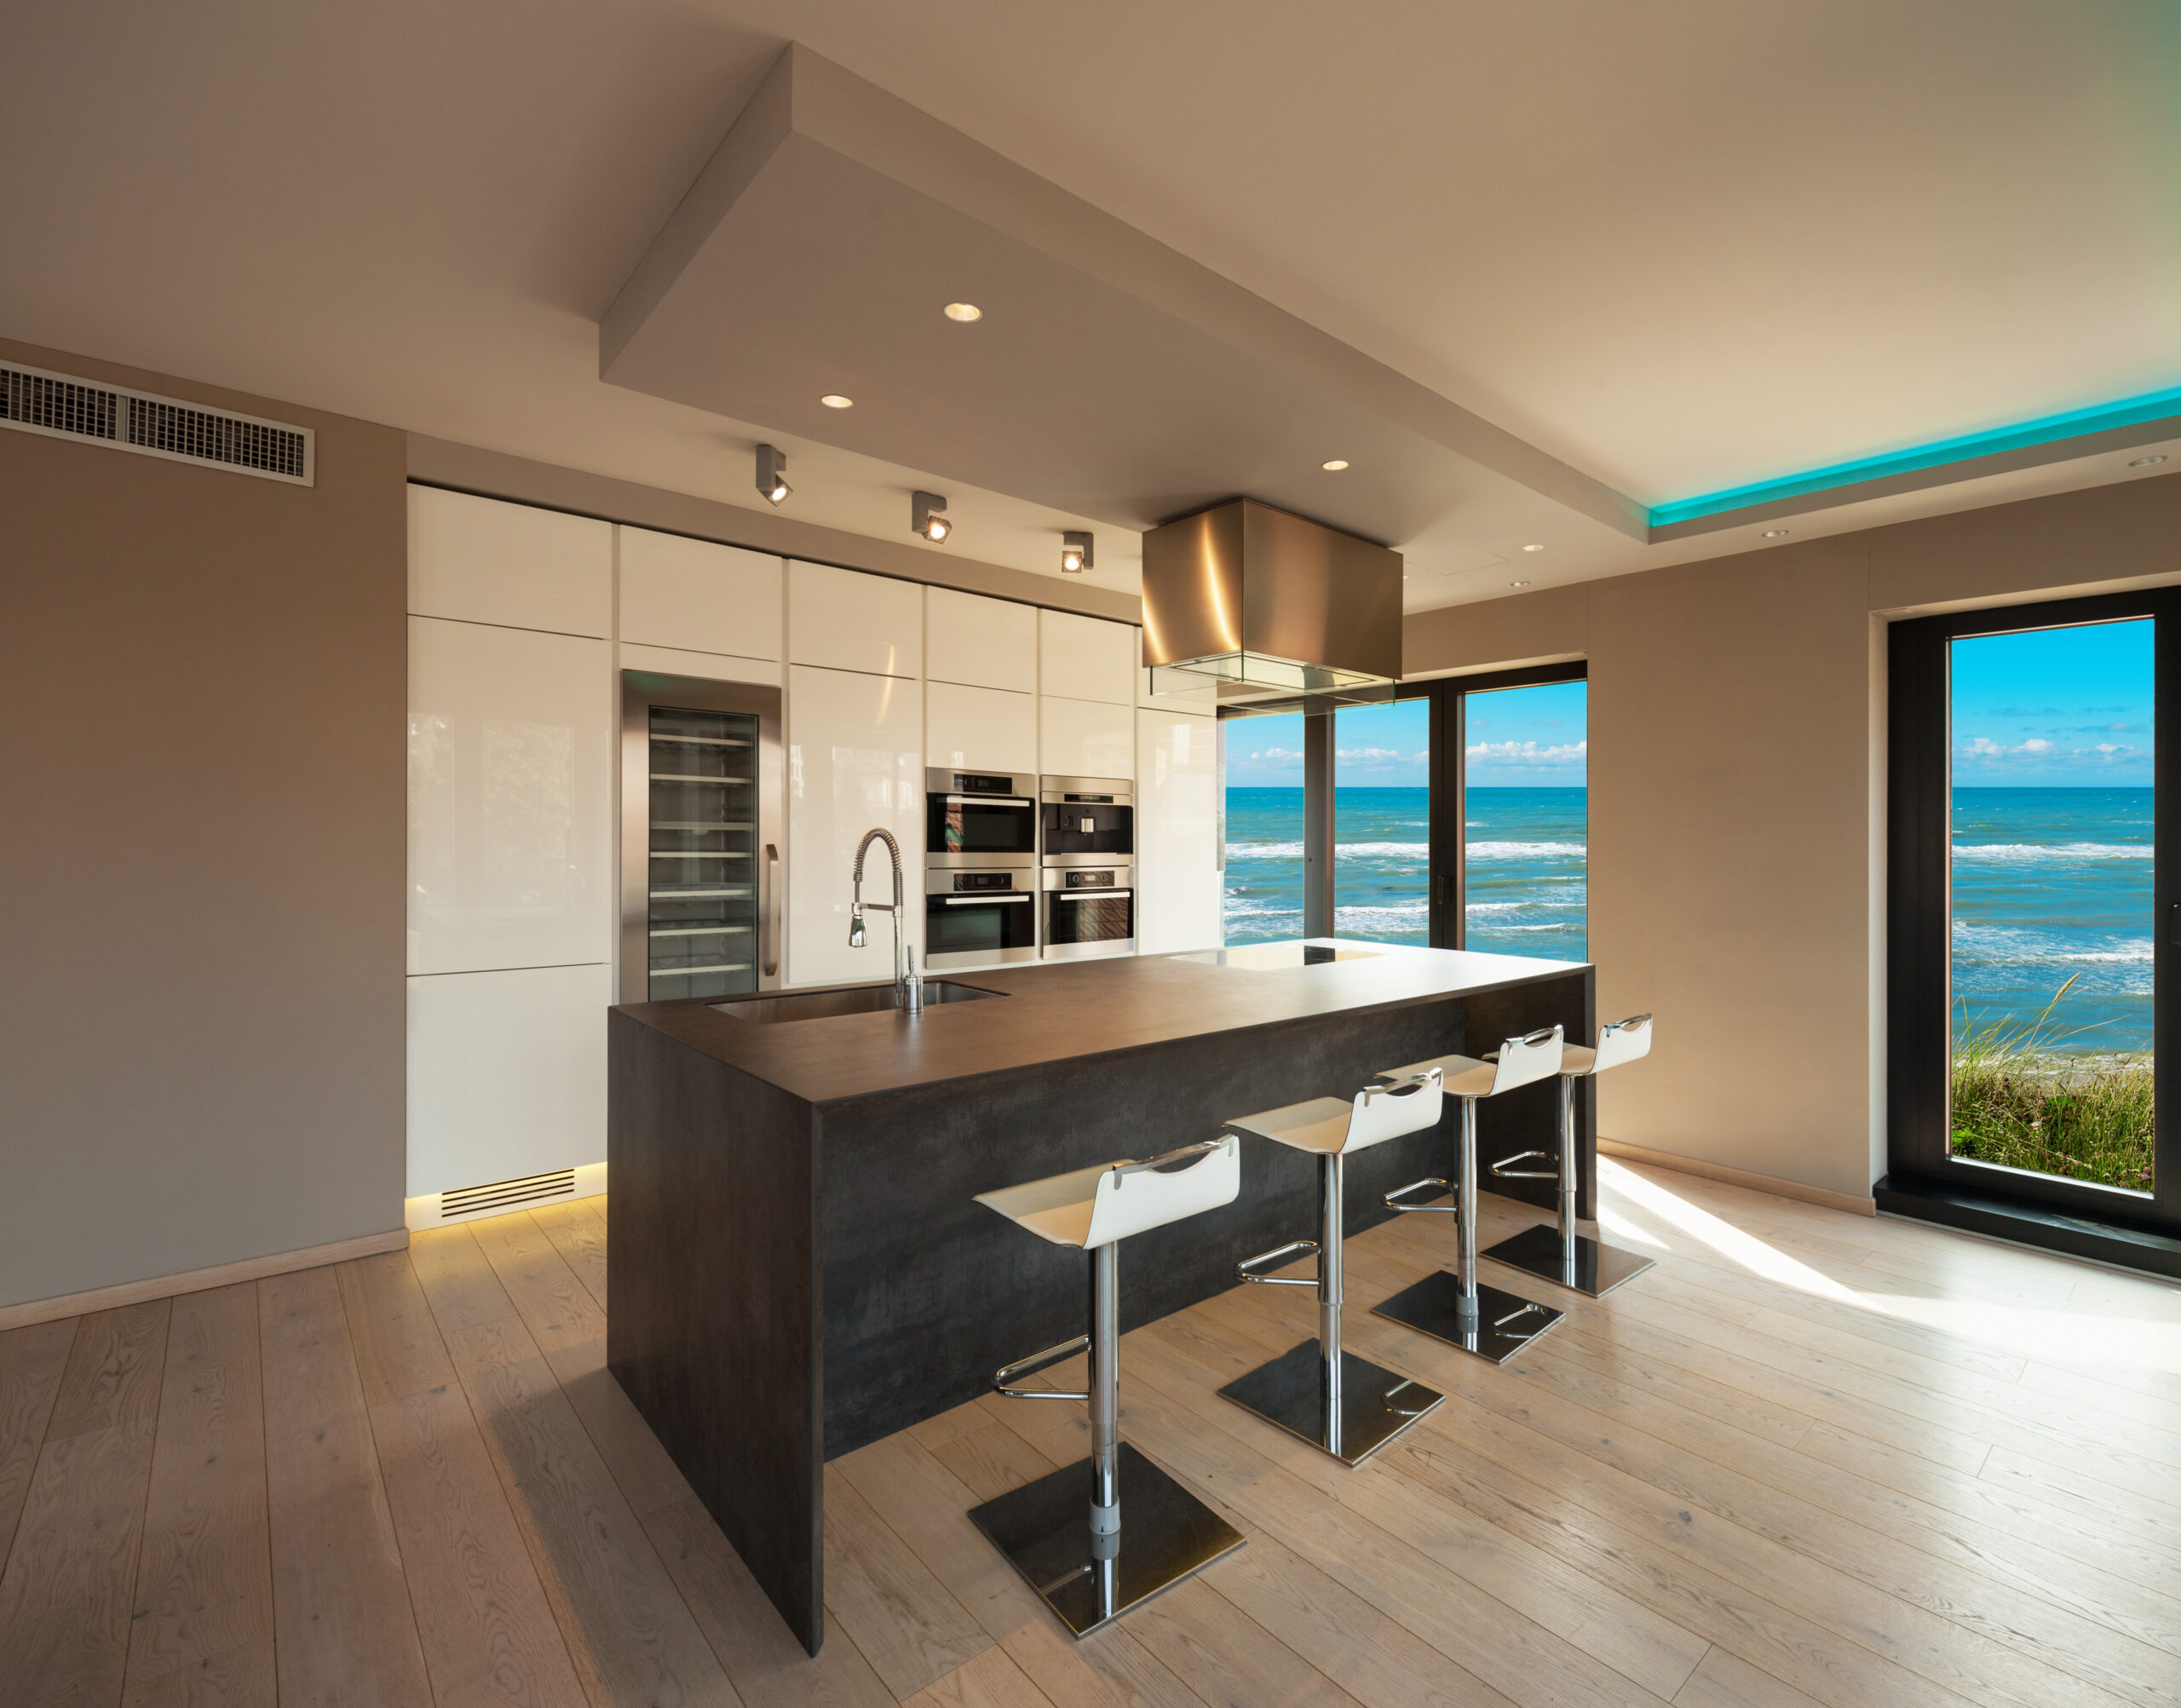 Interiors of a modern apartment, without furniture, sea view